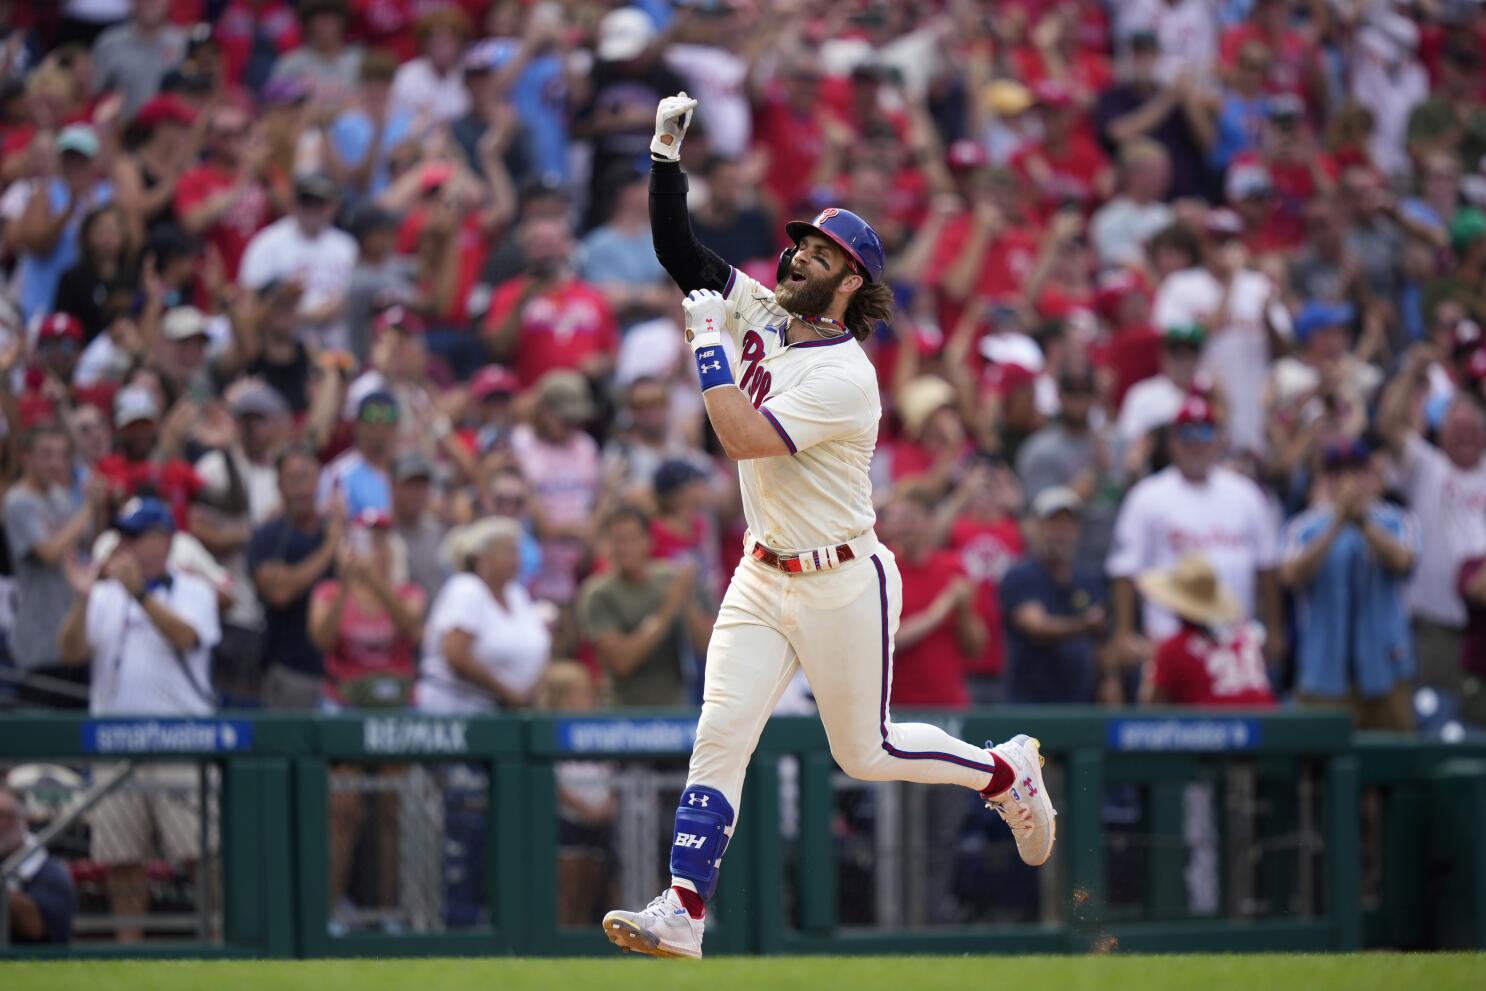 Phillies' Bryce Harper Closes In on His Second M.V.P. - The New